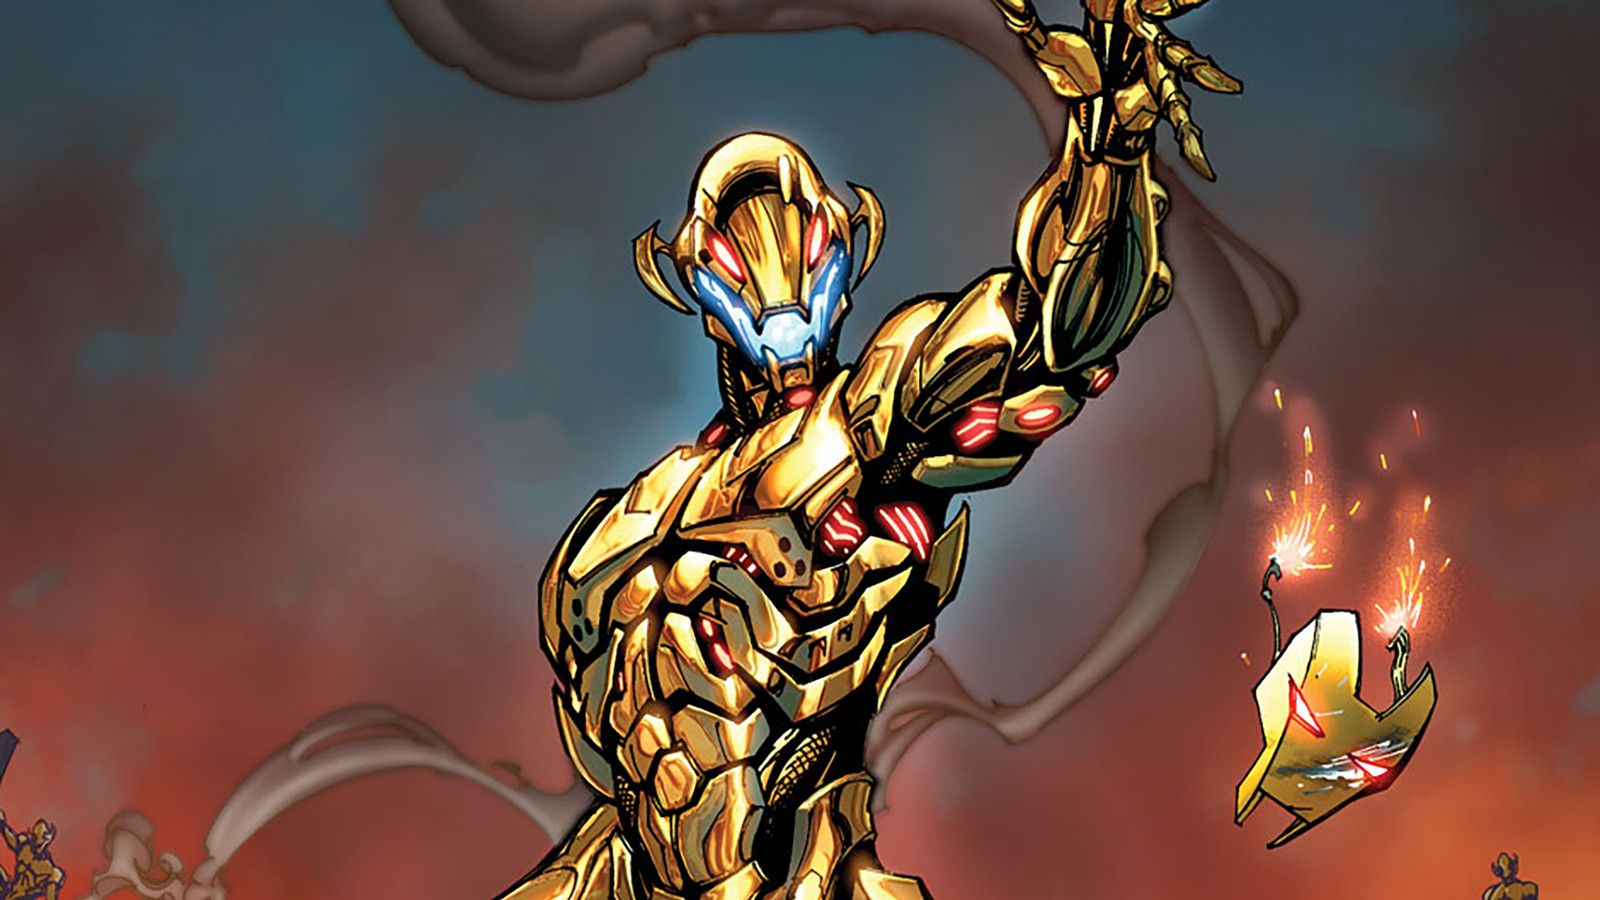 The rise of Ultron: what to expect from the Avengers' new villain